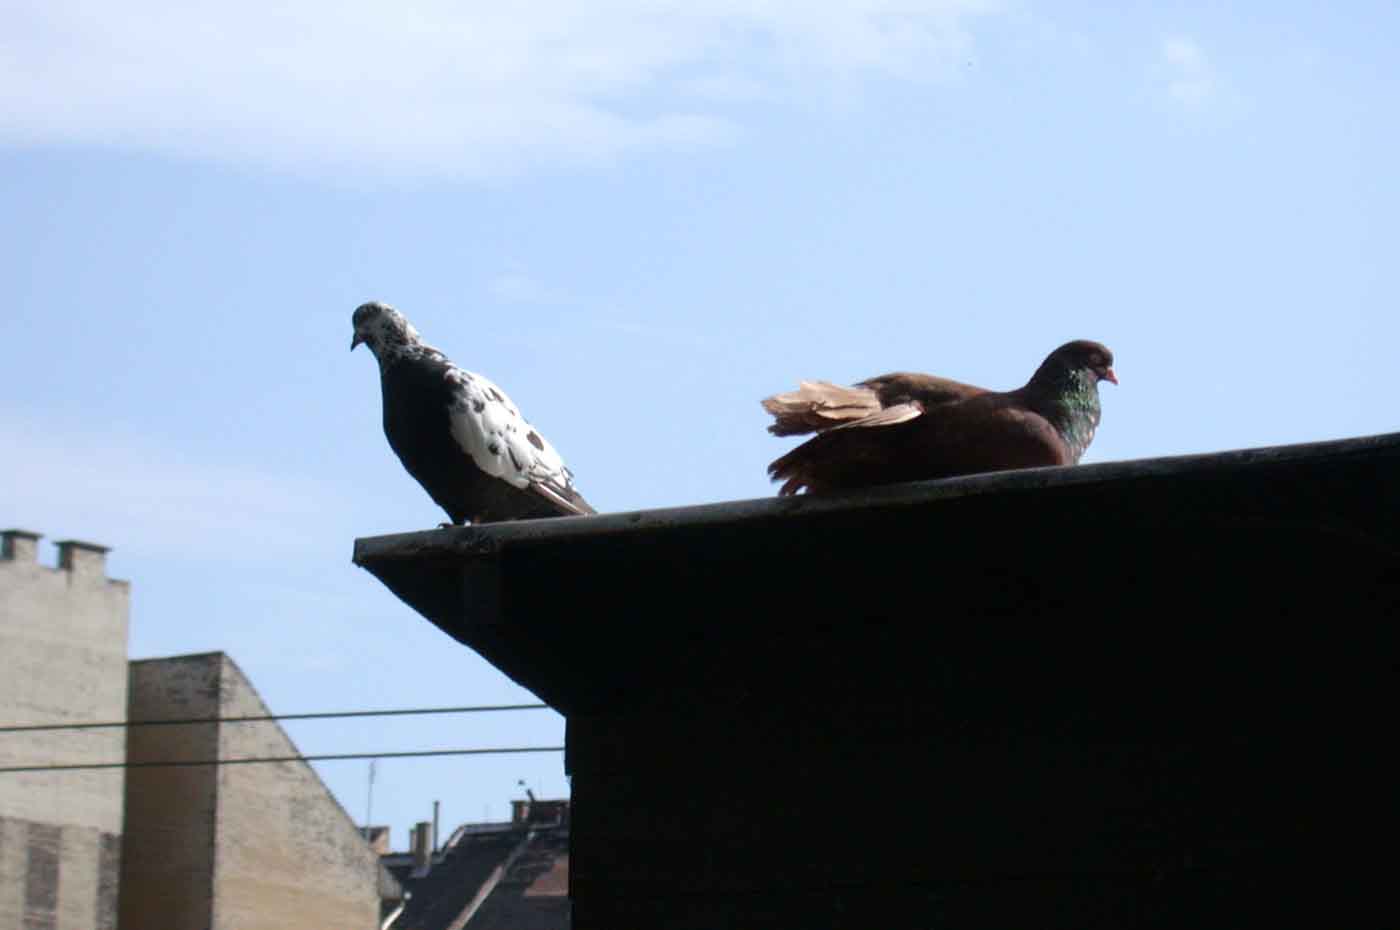 pigeons-on-the-roof-1252812